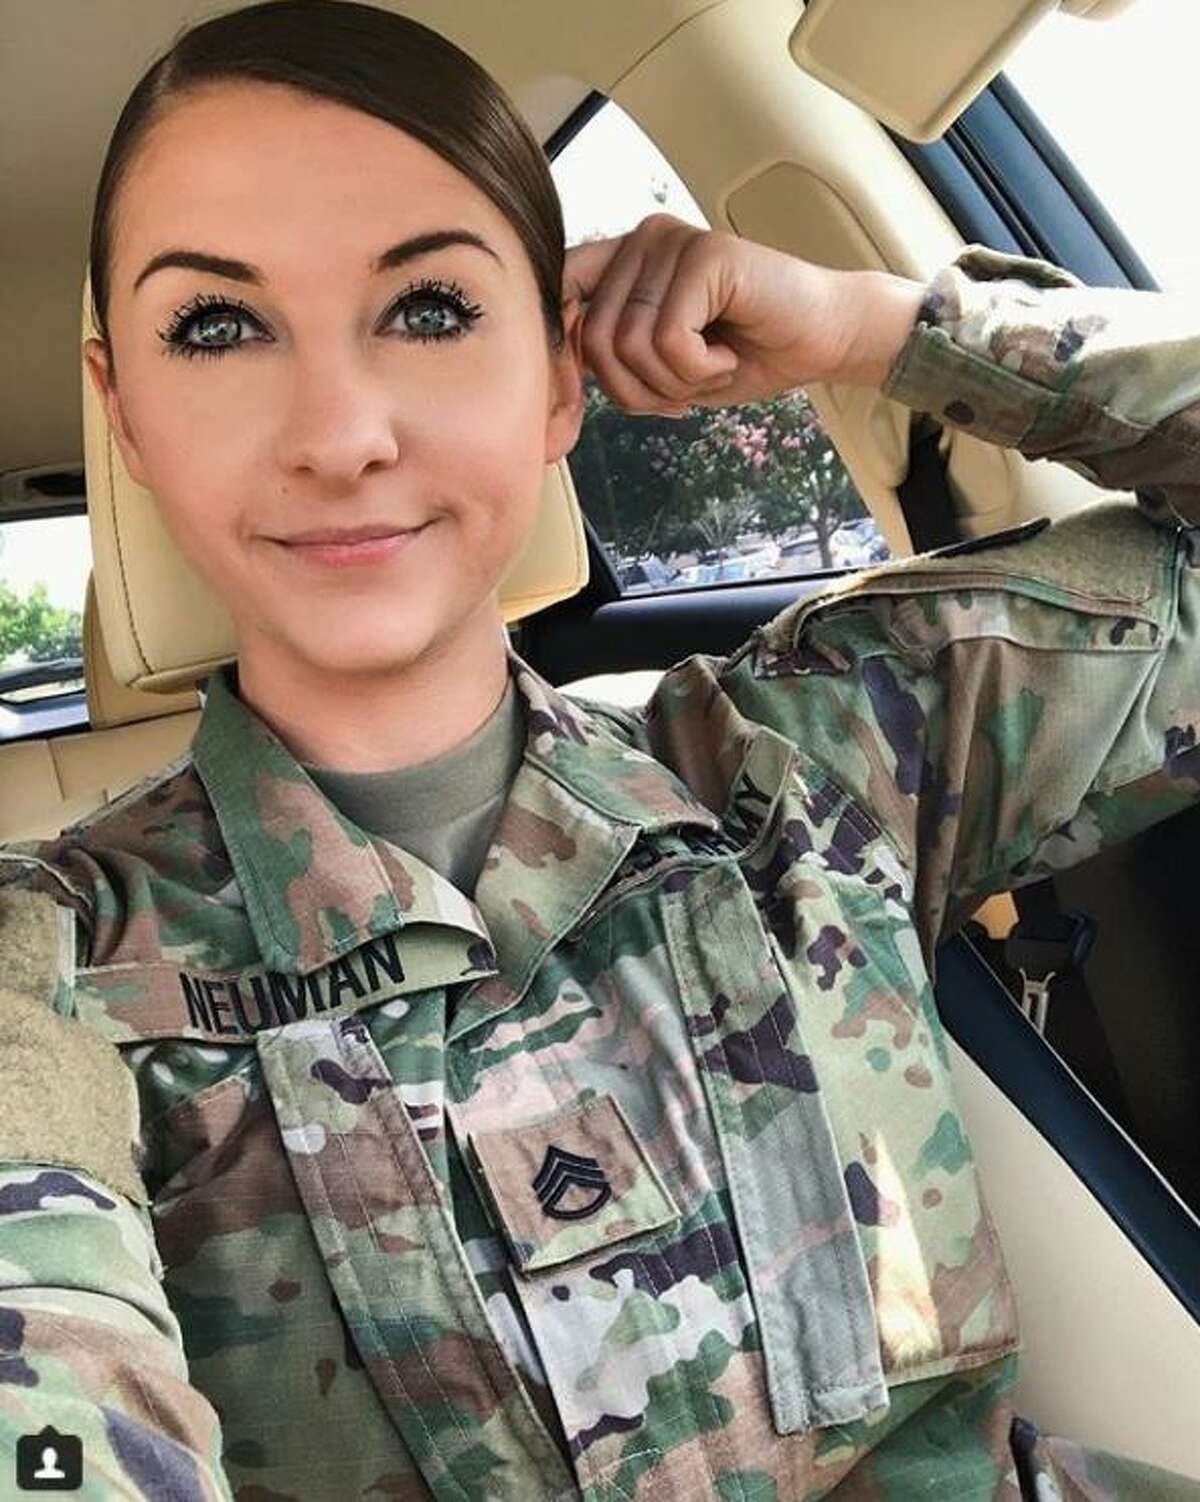 Military onlyfans account